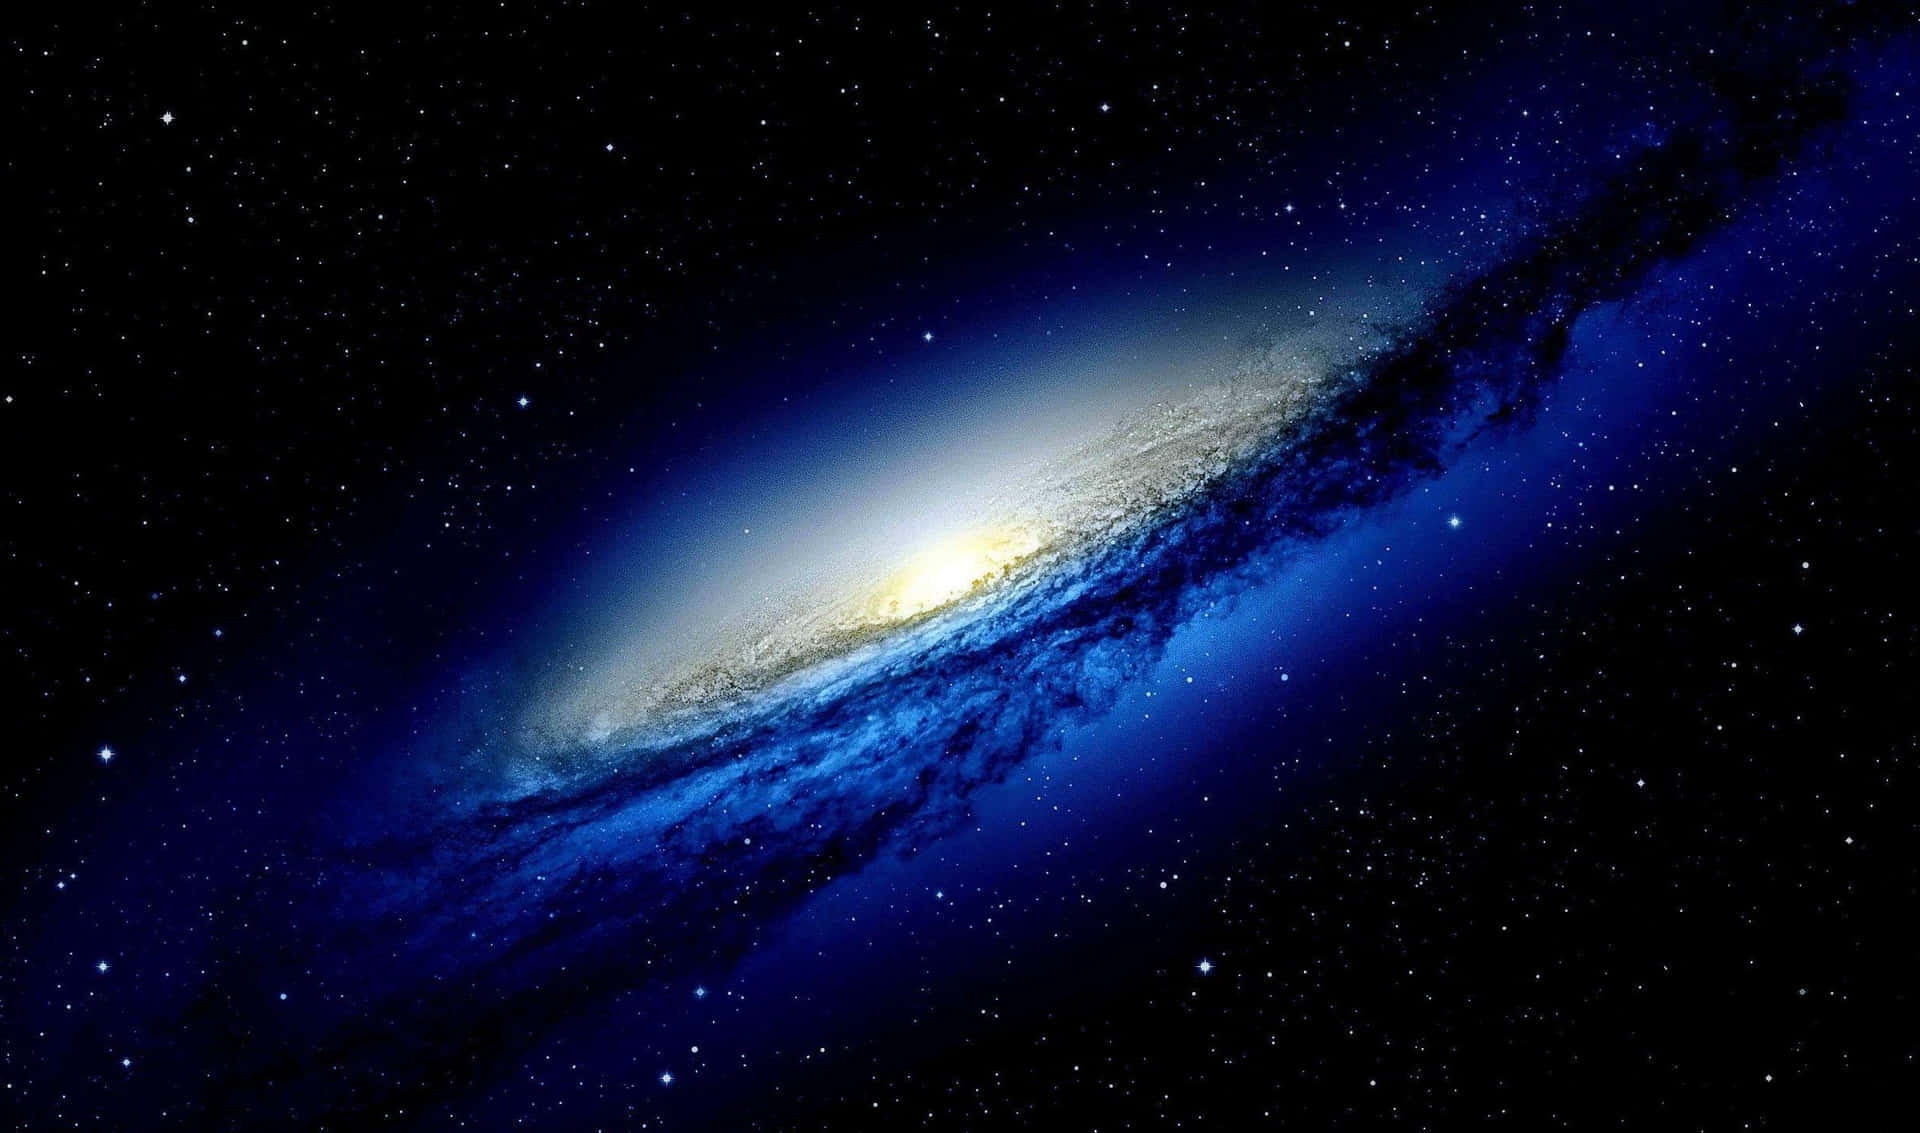 The Galaxy Is Shown In Blue And White